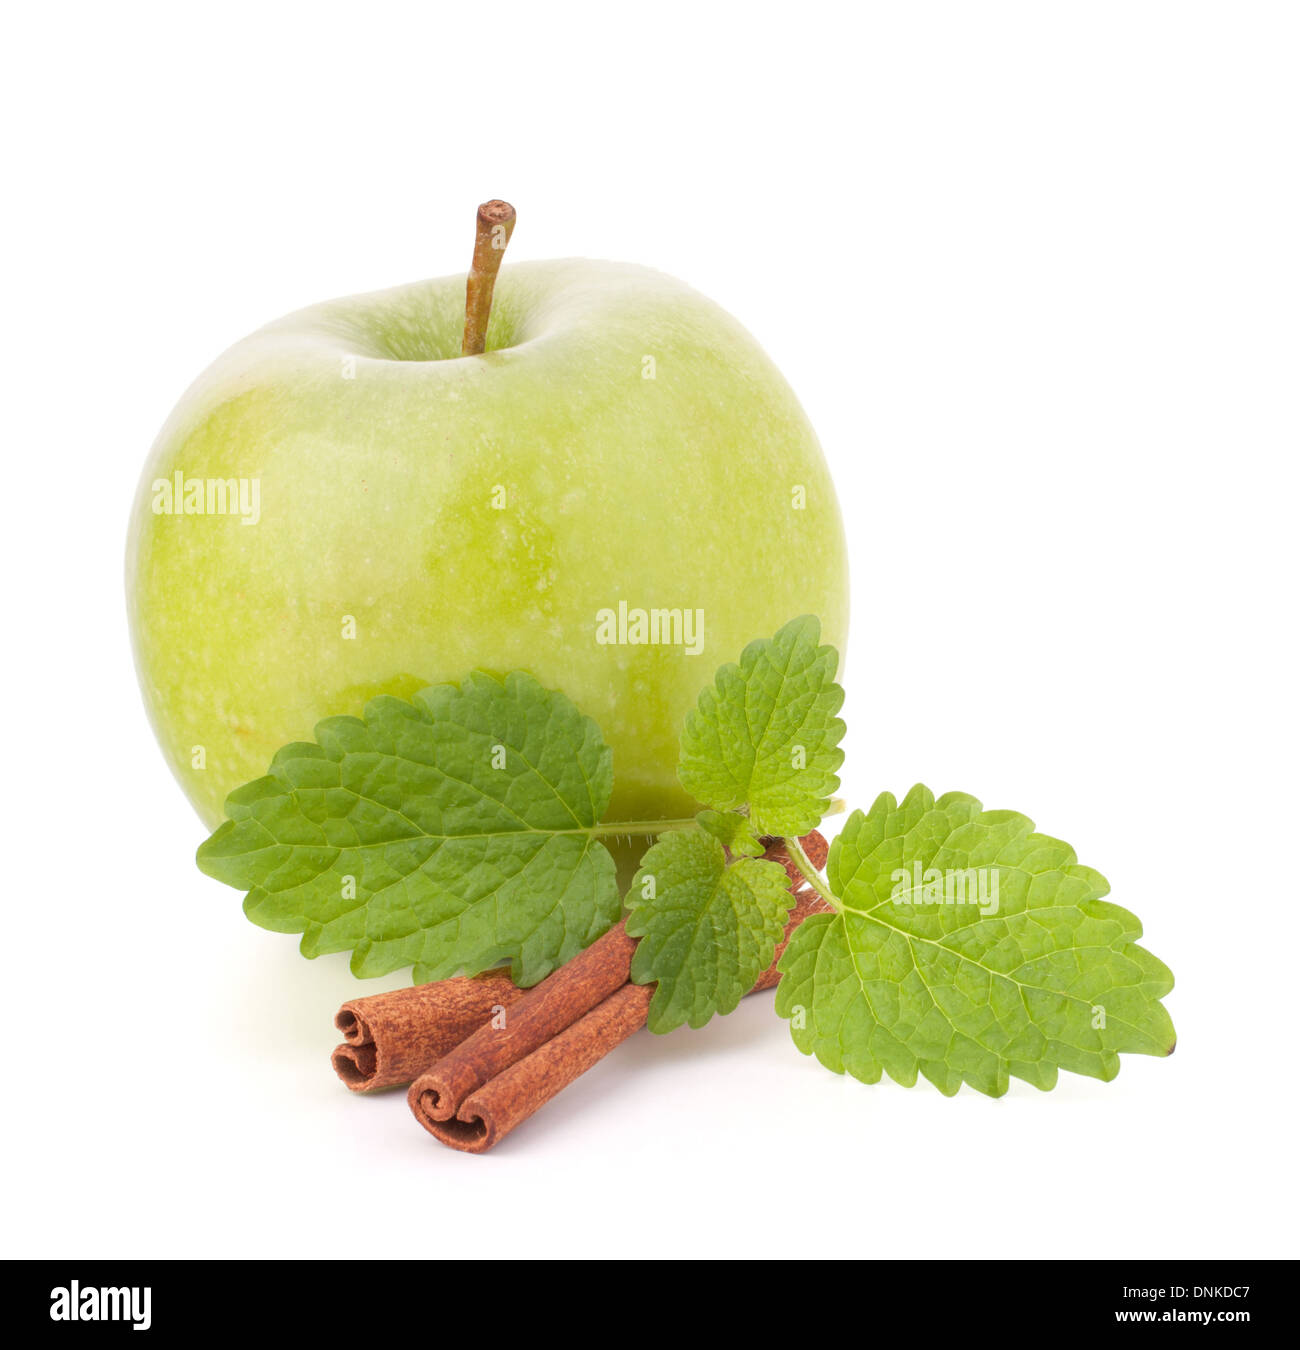 Green apple, cinnamon sticks and mint leaves still life isolated on white cutout. Stock Photo